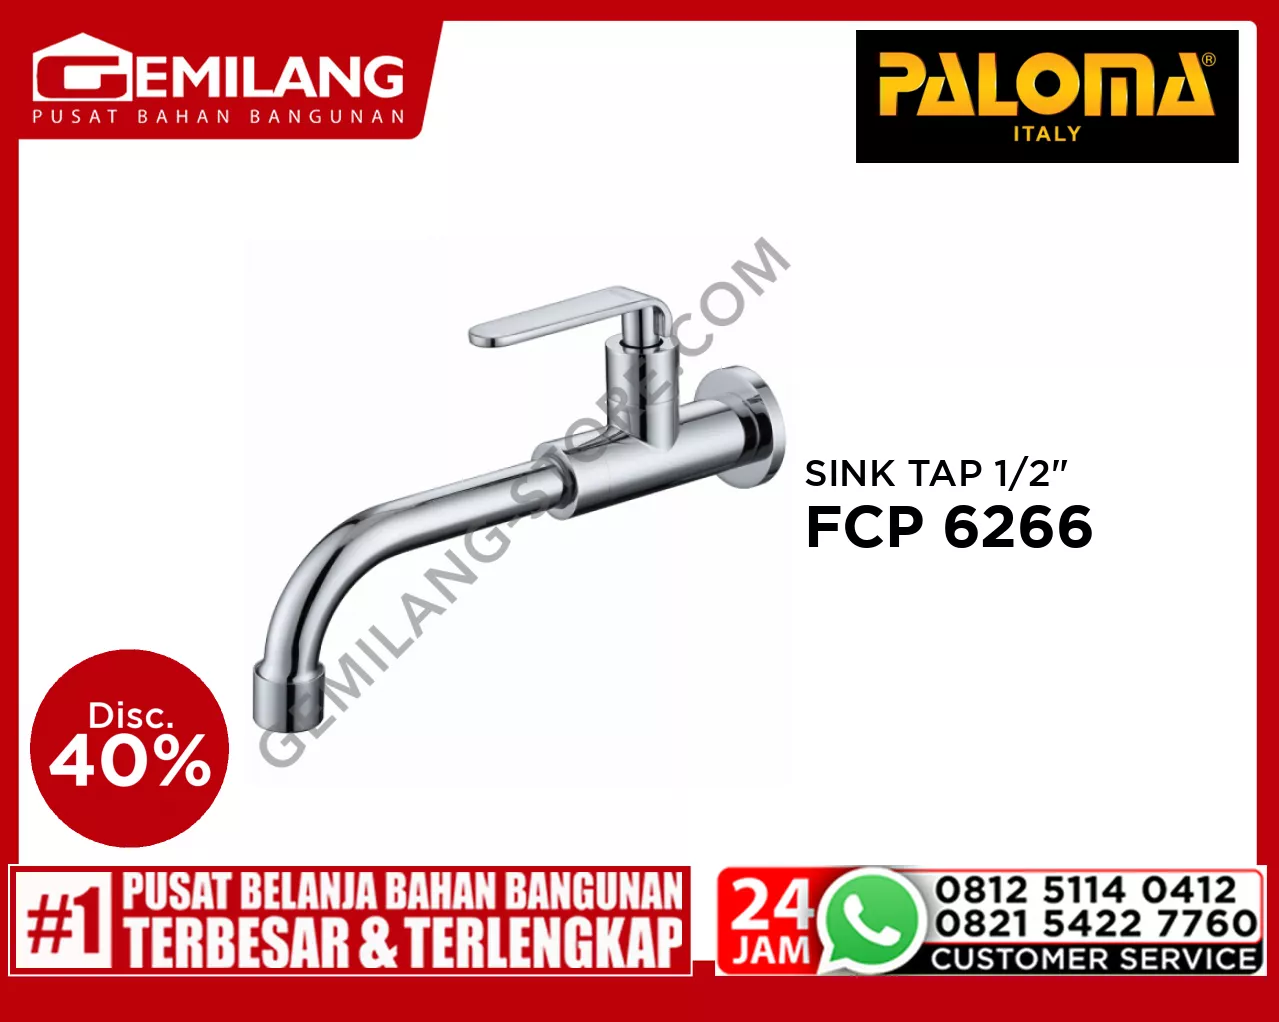 PALOMA NEPTUNE WALL SINK TAP CHROME 1/2inch FCP 6266